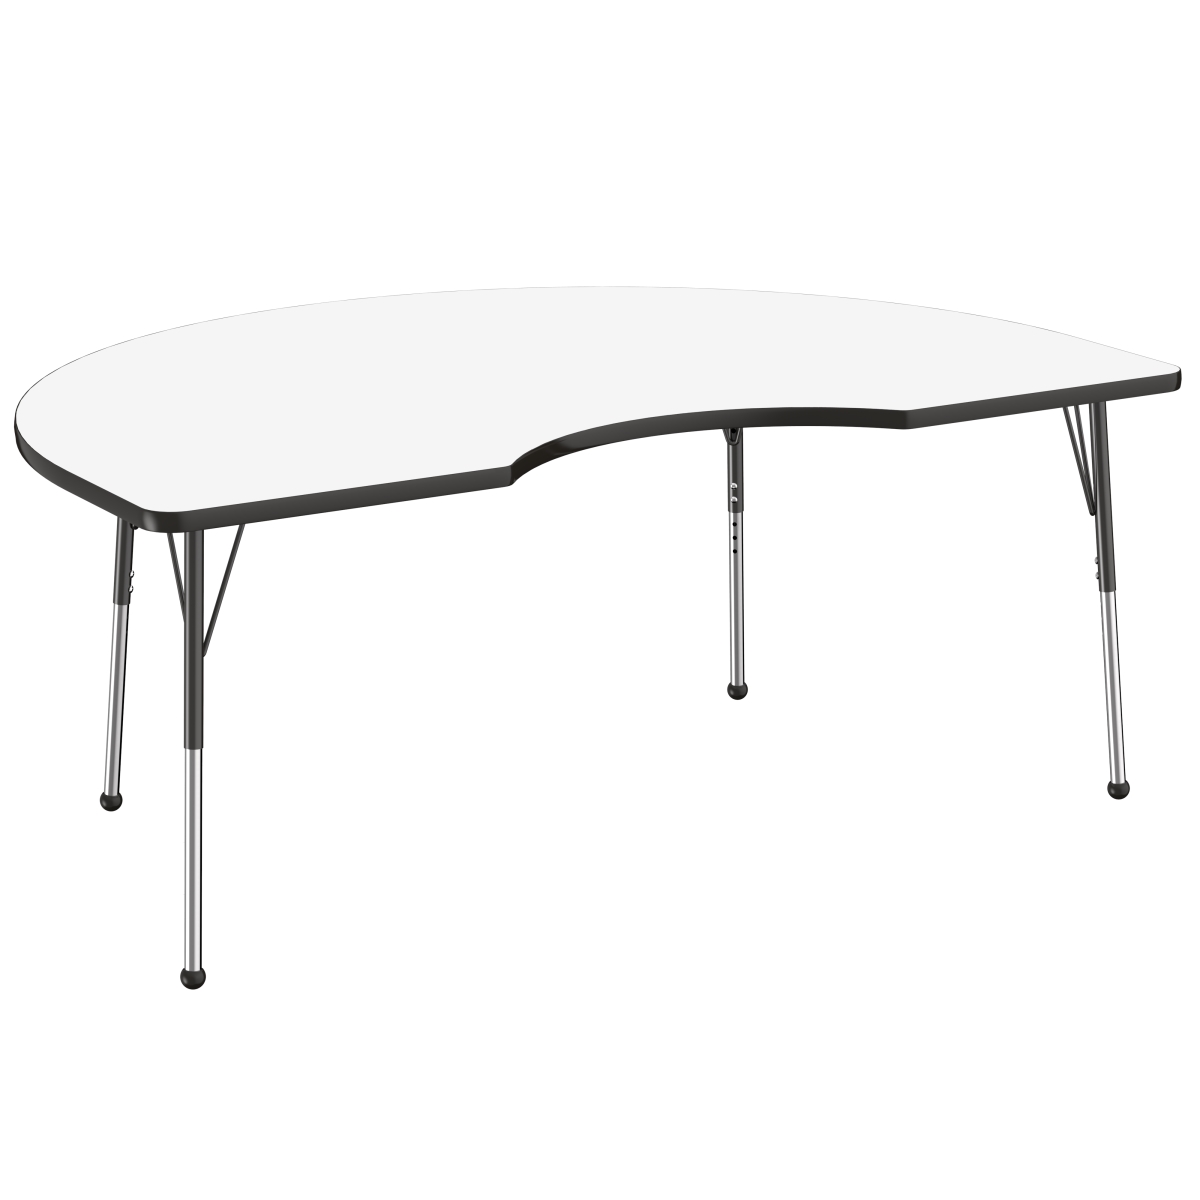 10238-debk 48 X 72 In. Kidney Dry-erase Adjustable Activity Table With Standard Ball - Black